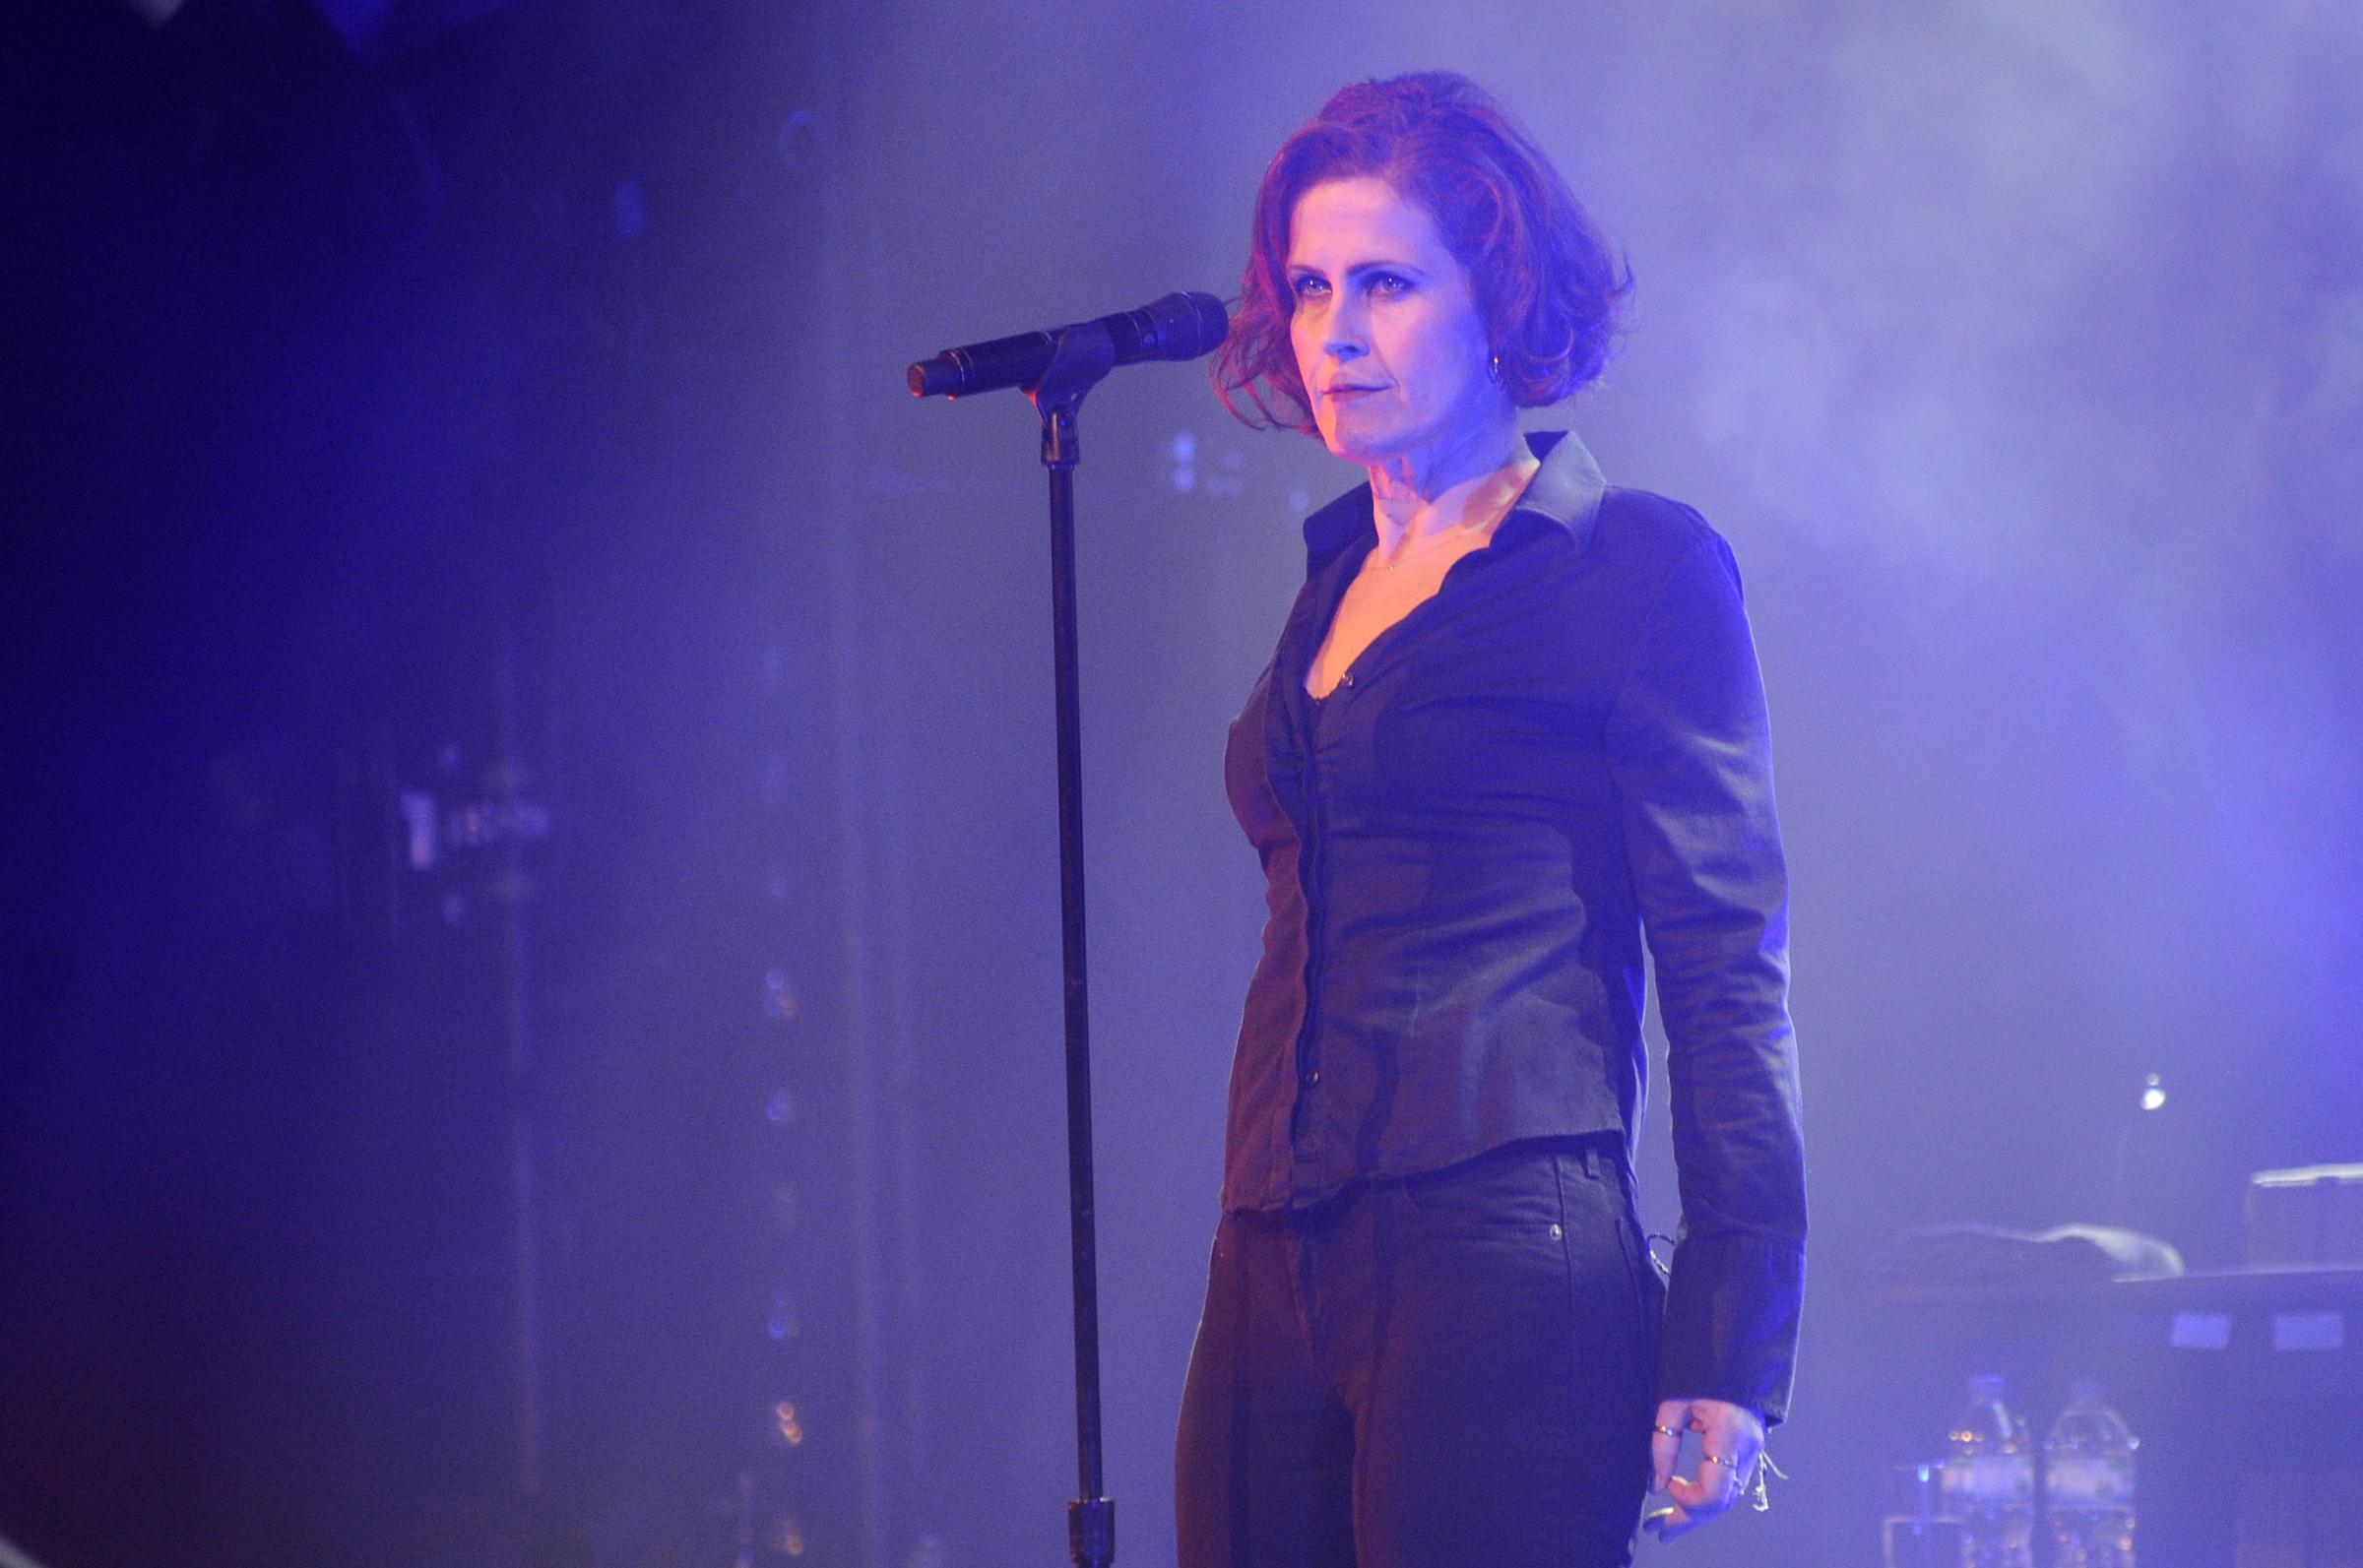 Keeping it local - Southend-born singer Alison Moyet took to the stage for a gig in October 2013